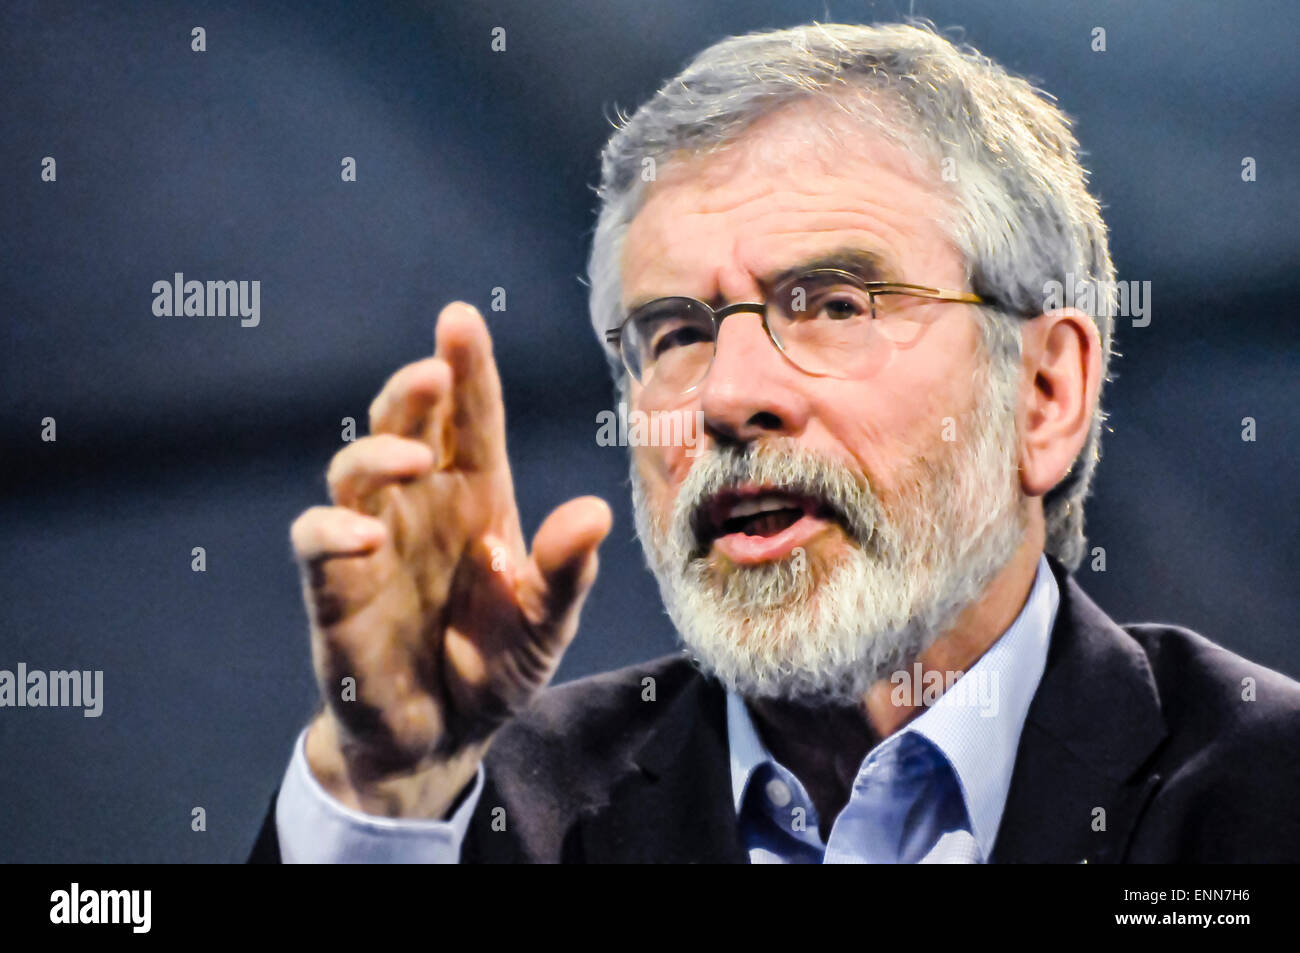 Gerry Adams being interviewed for television Stock Photo